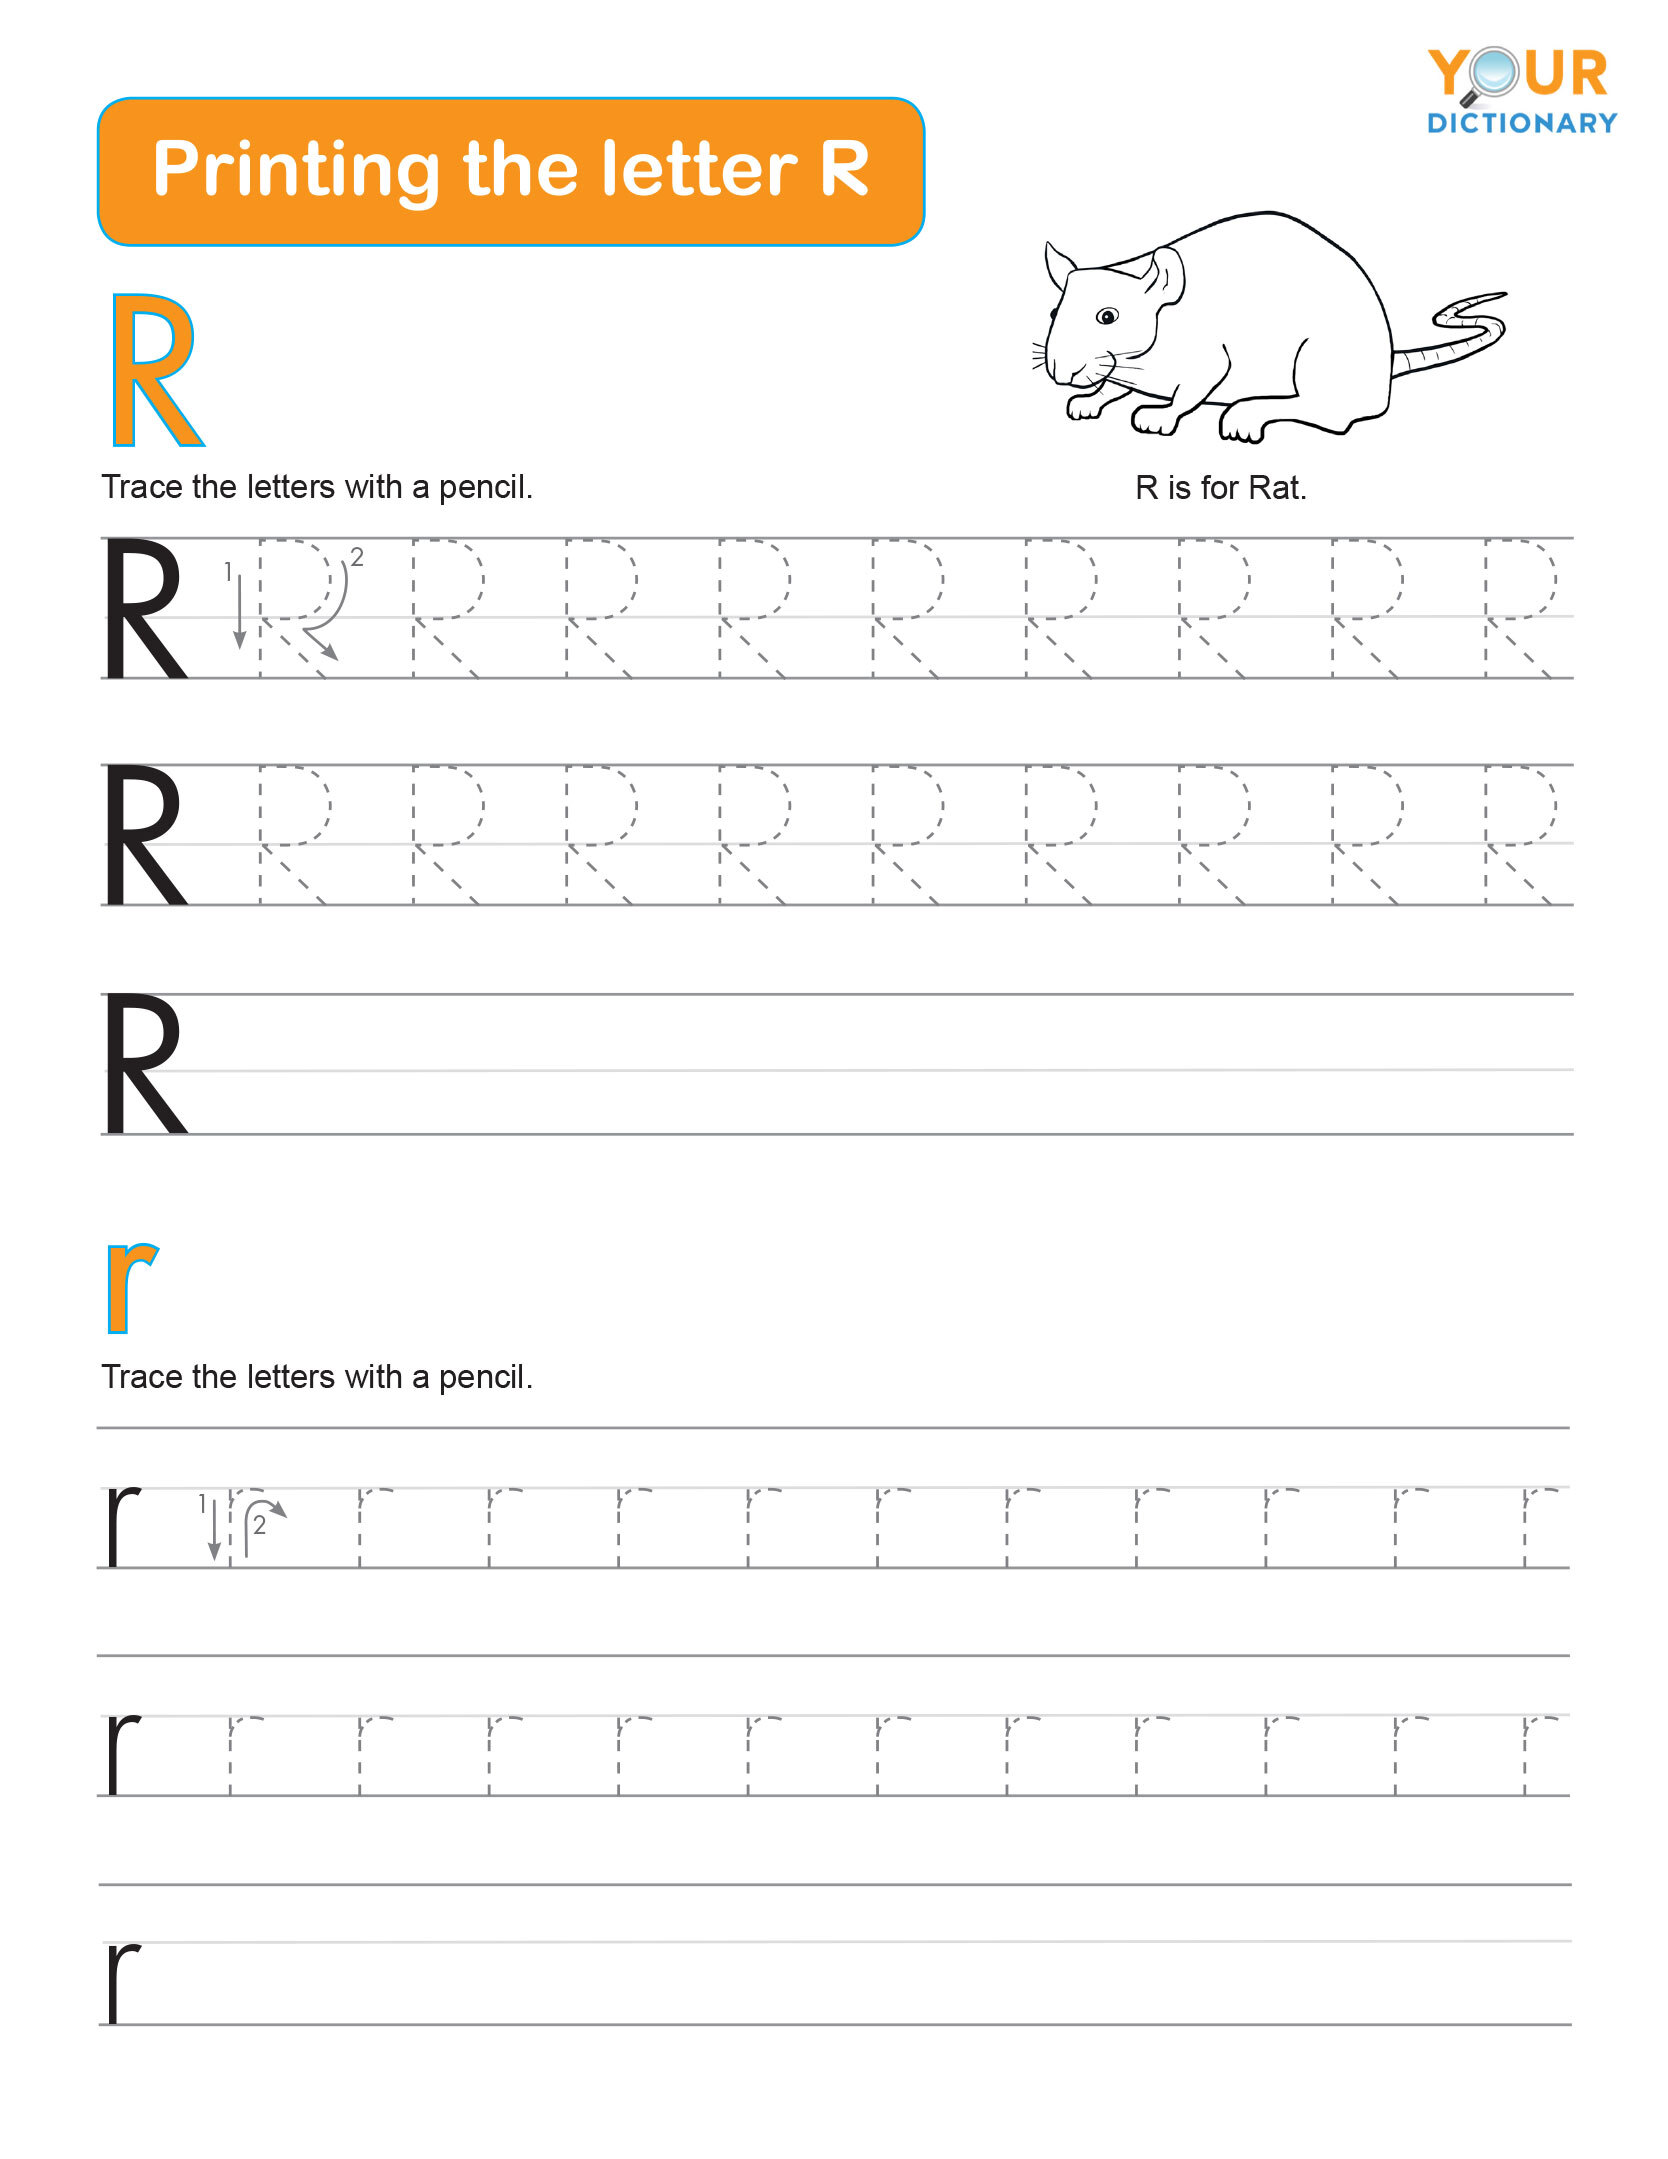 tracing the letter r practice worksheet